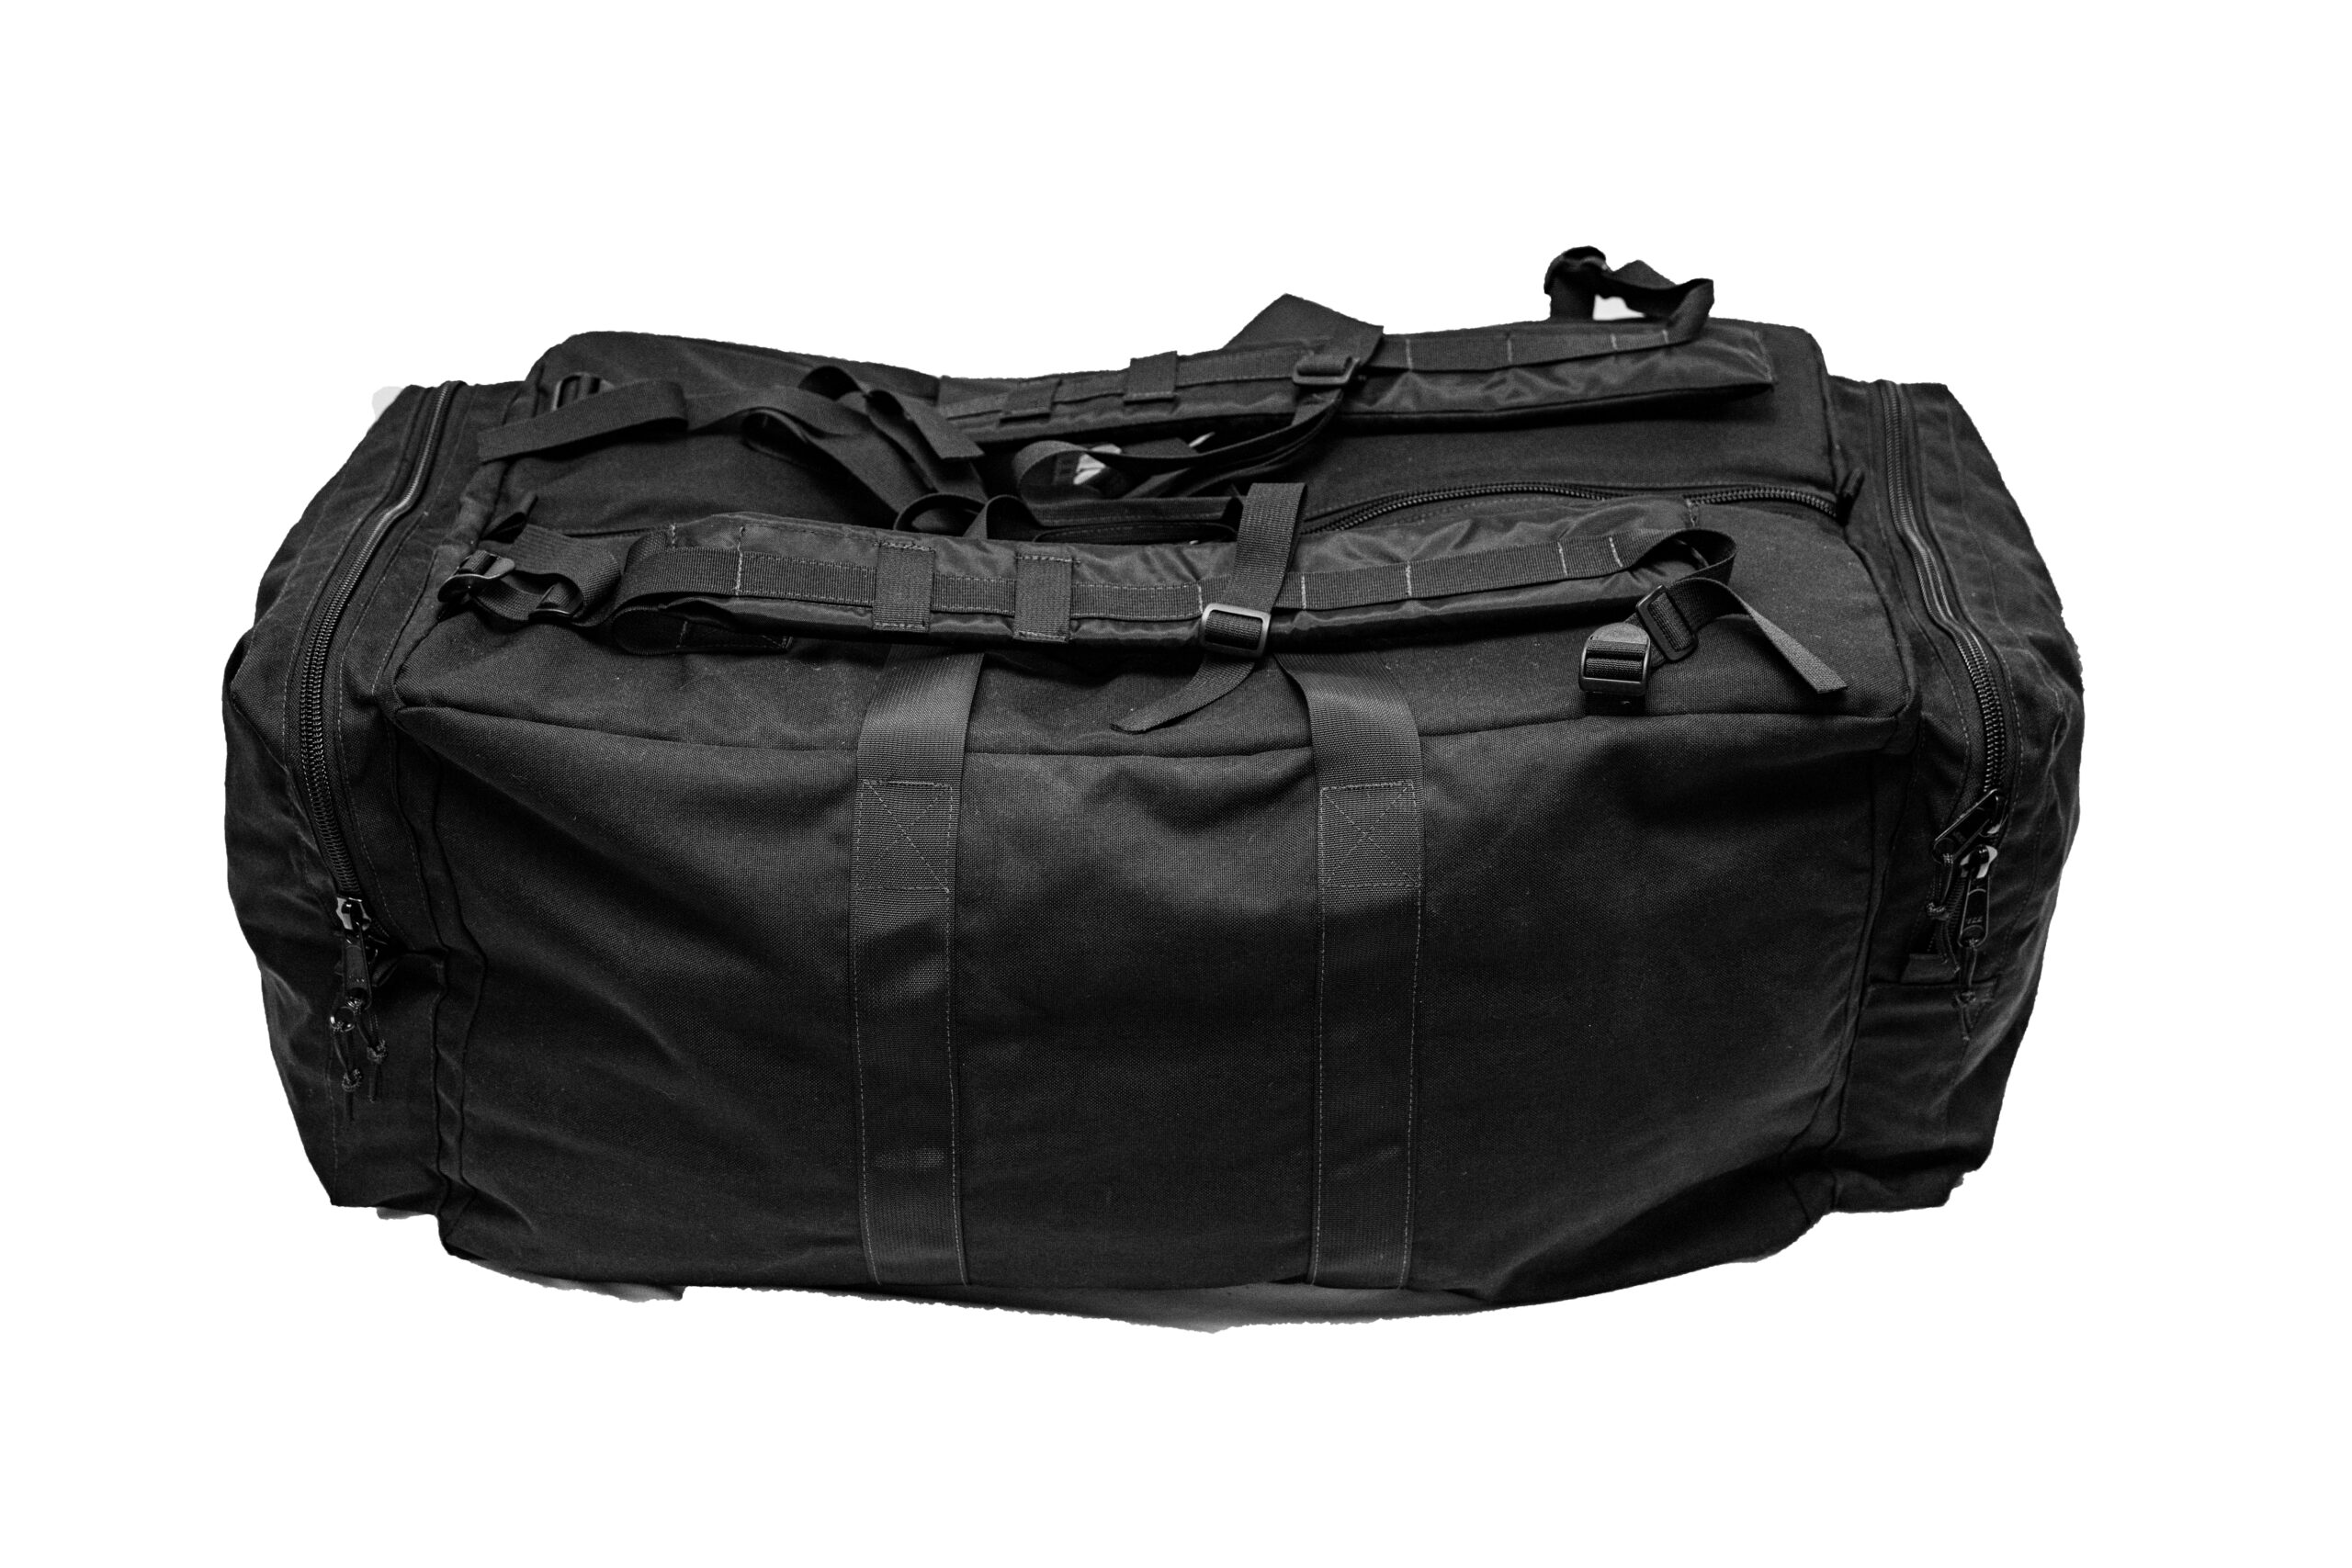 Equipment Bag - Pacific Safety Products